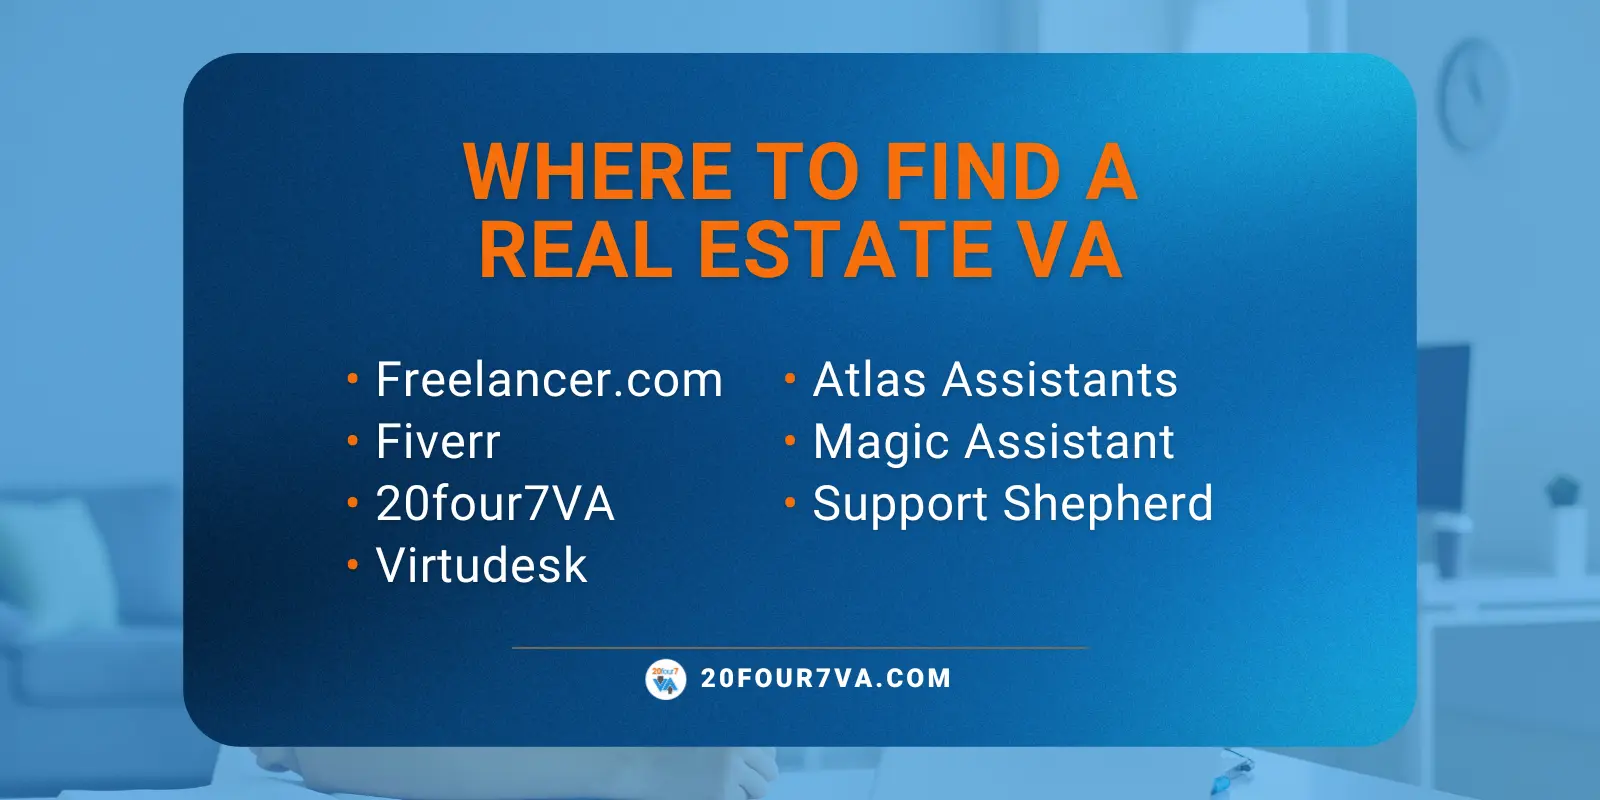 Where to find a real estate VA